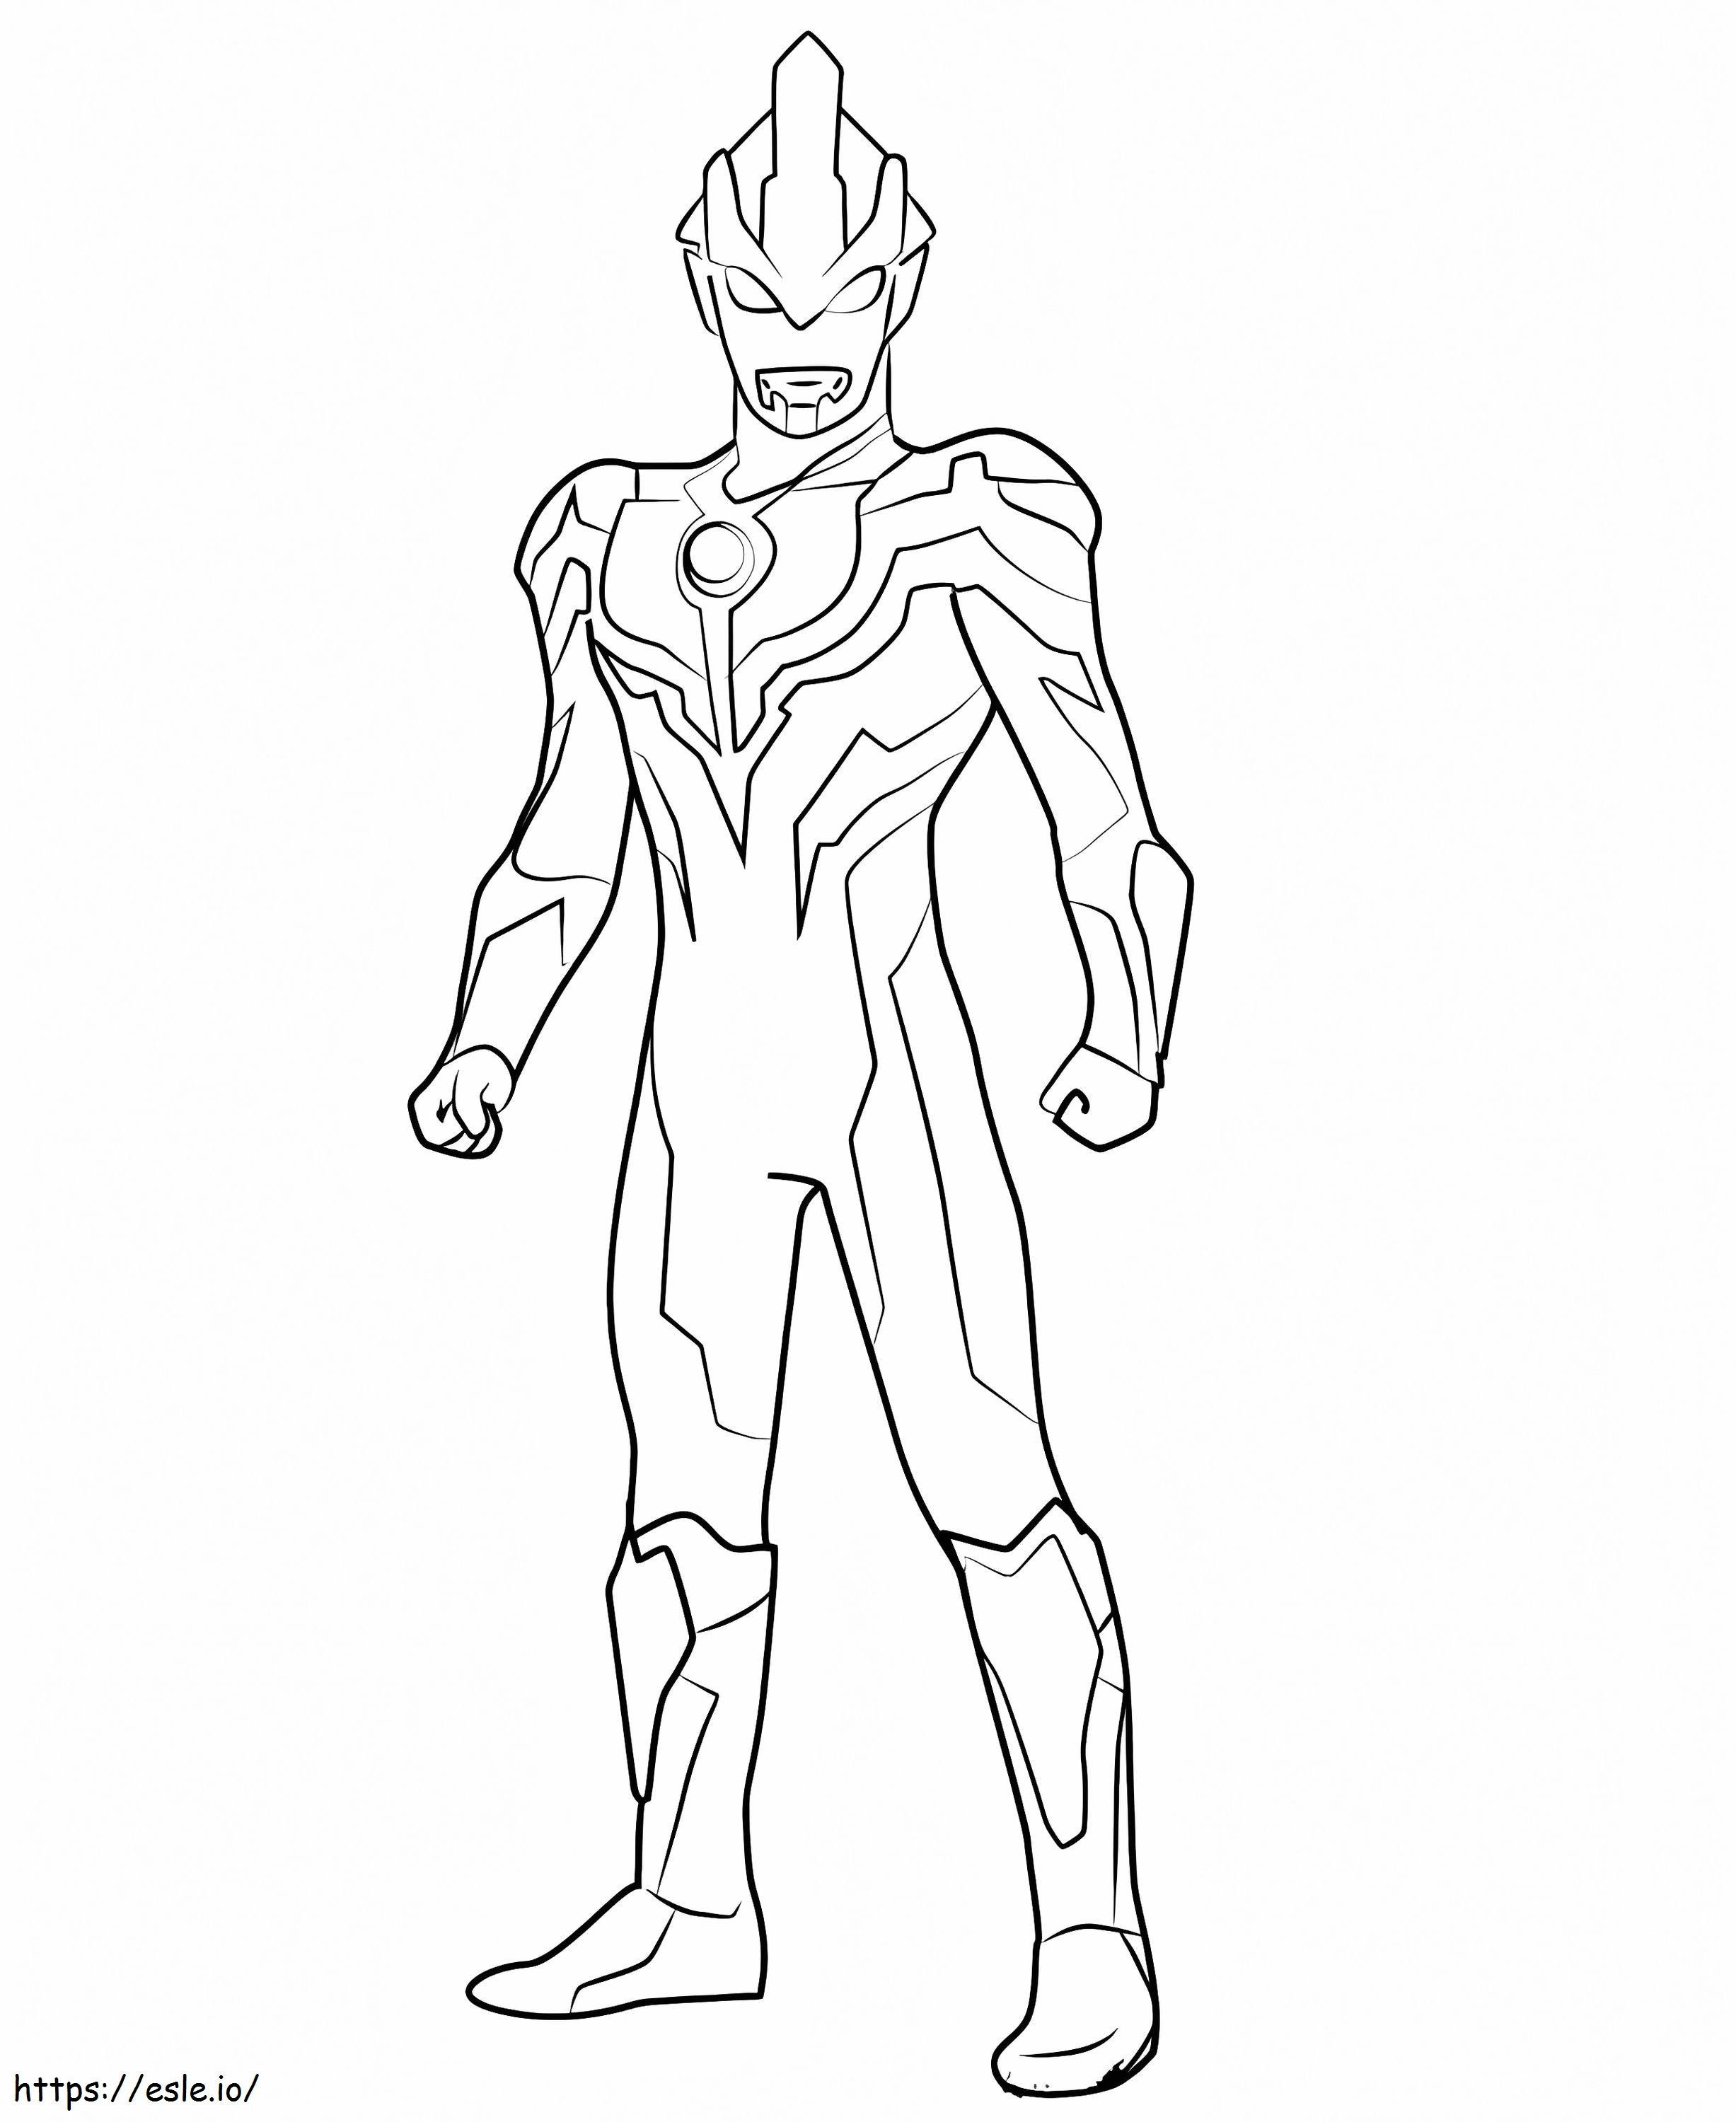 Awesome Ultraman coloring page